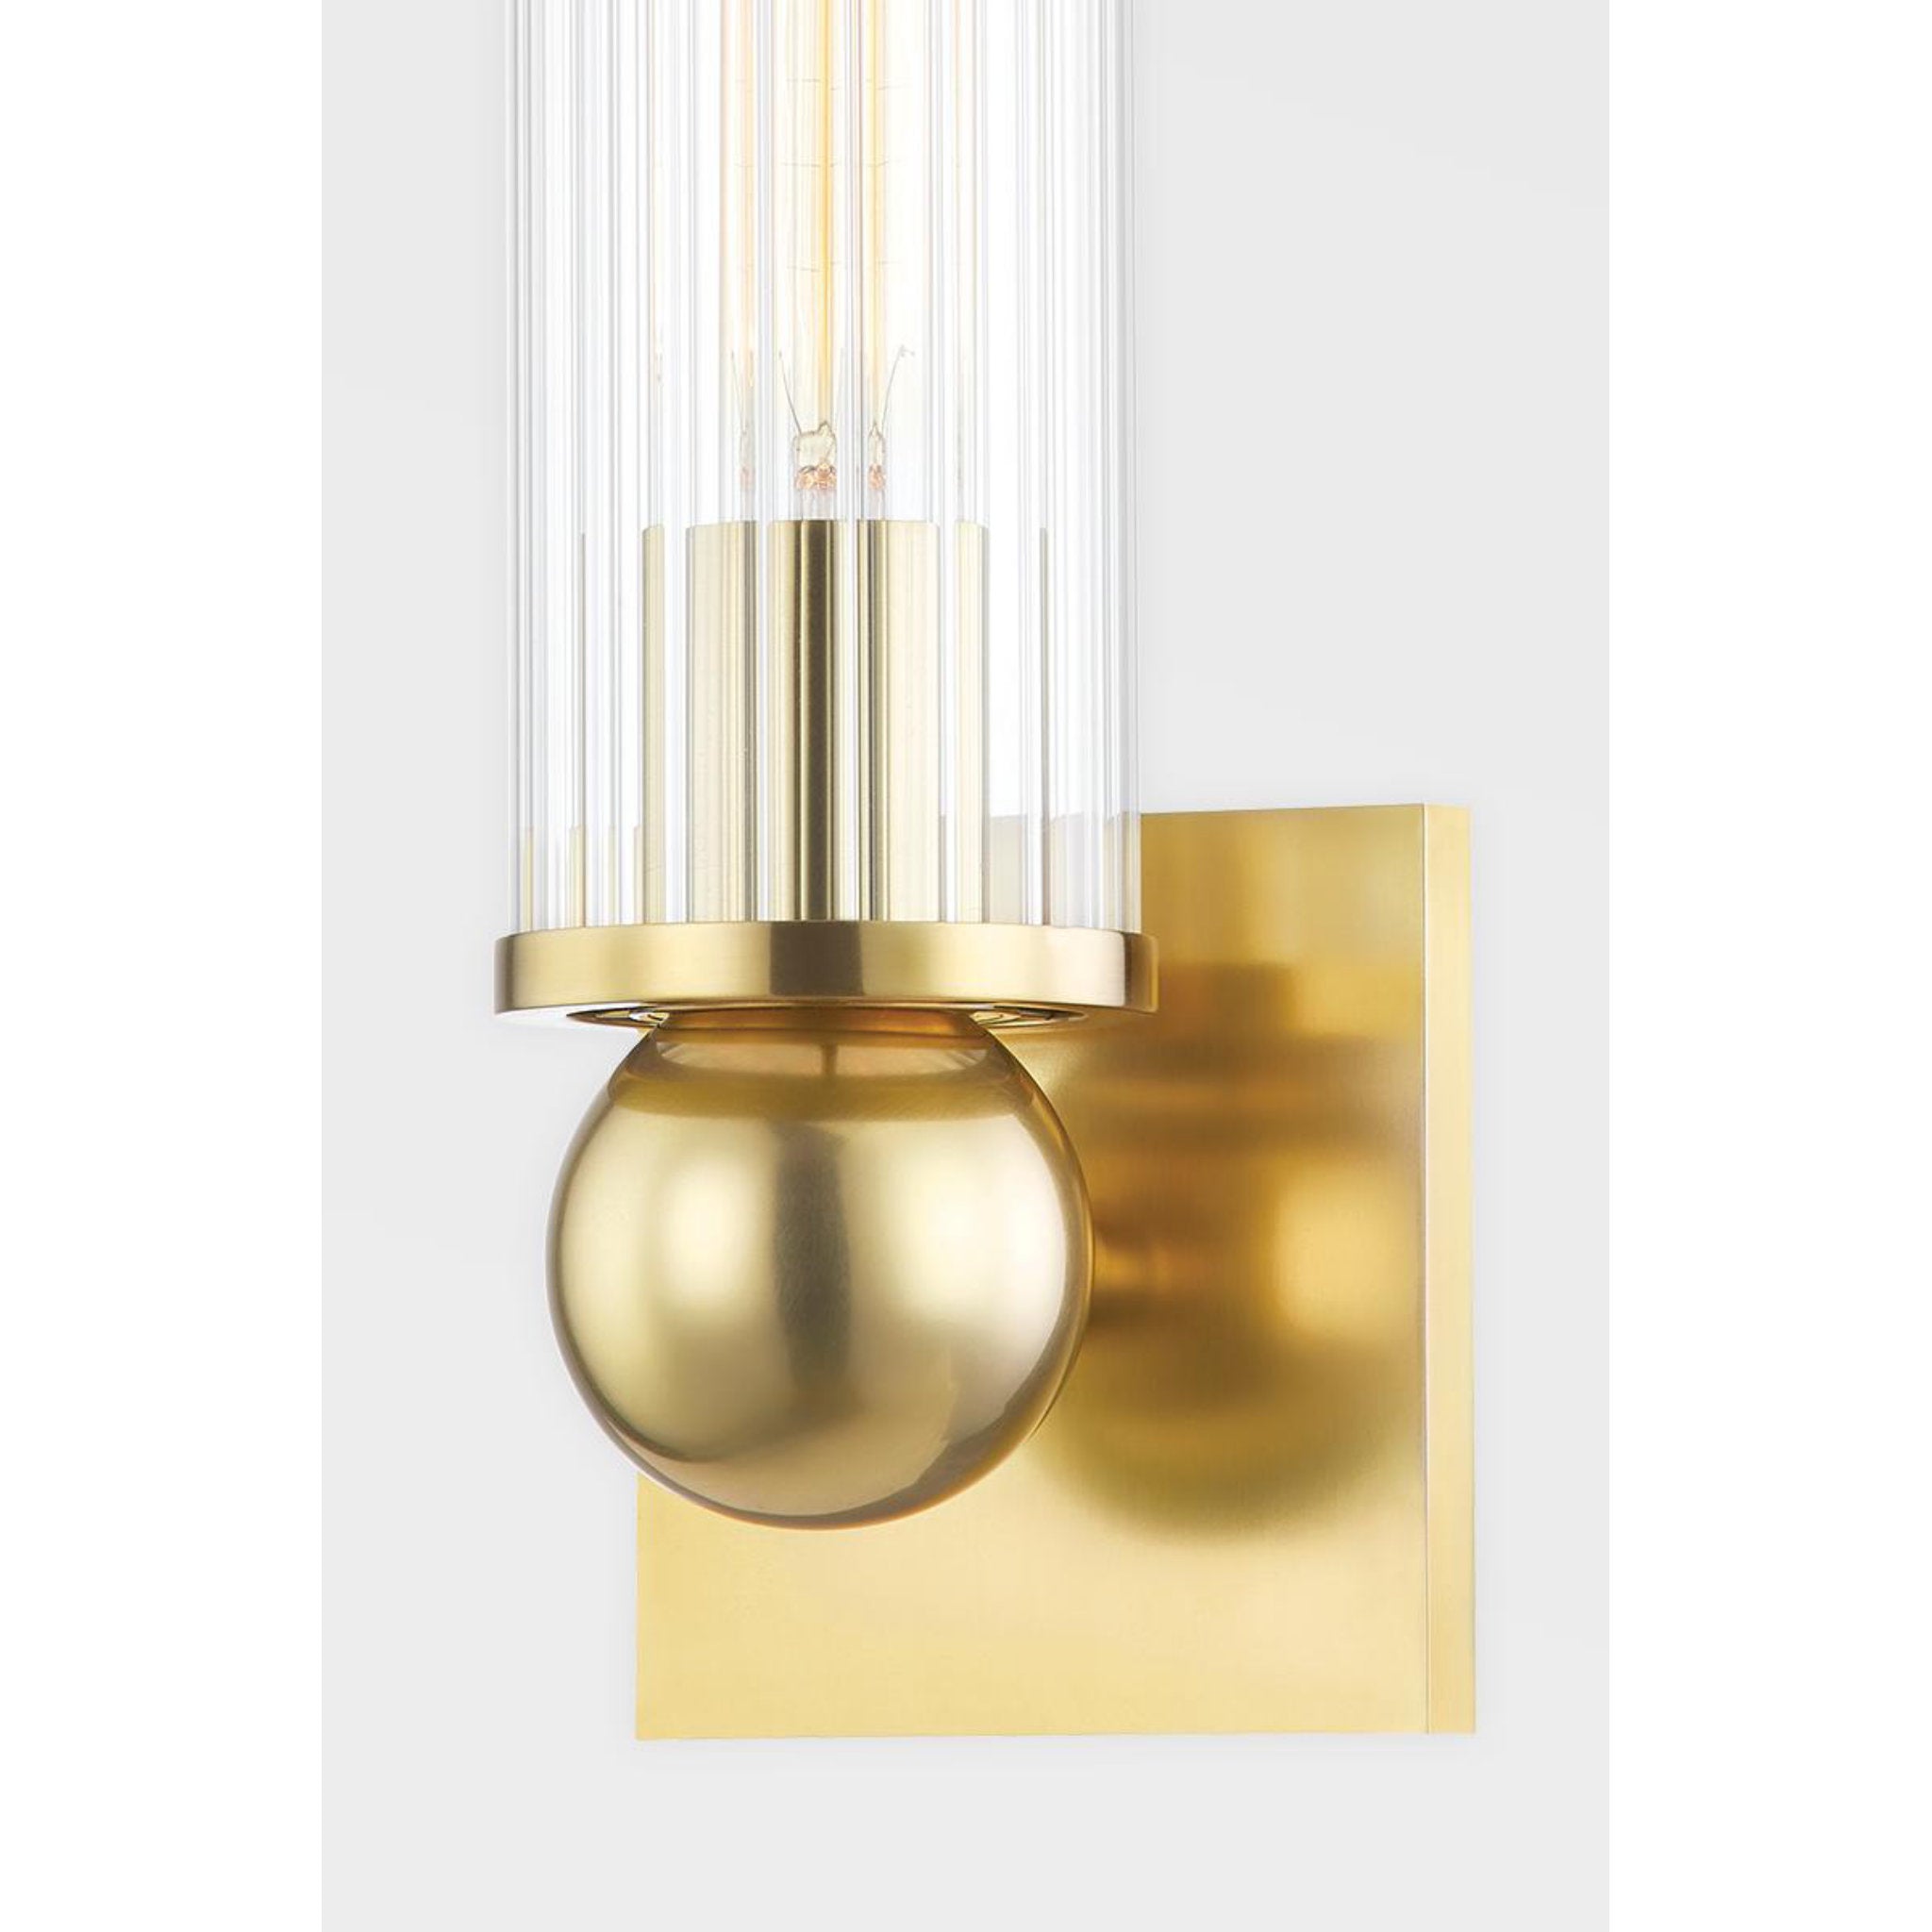 Malone 2 Light Wall Sconce in Aged Brass